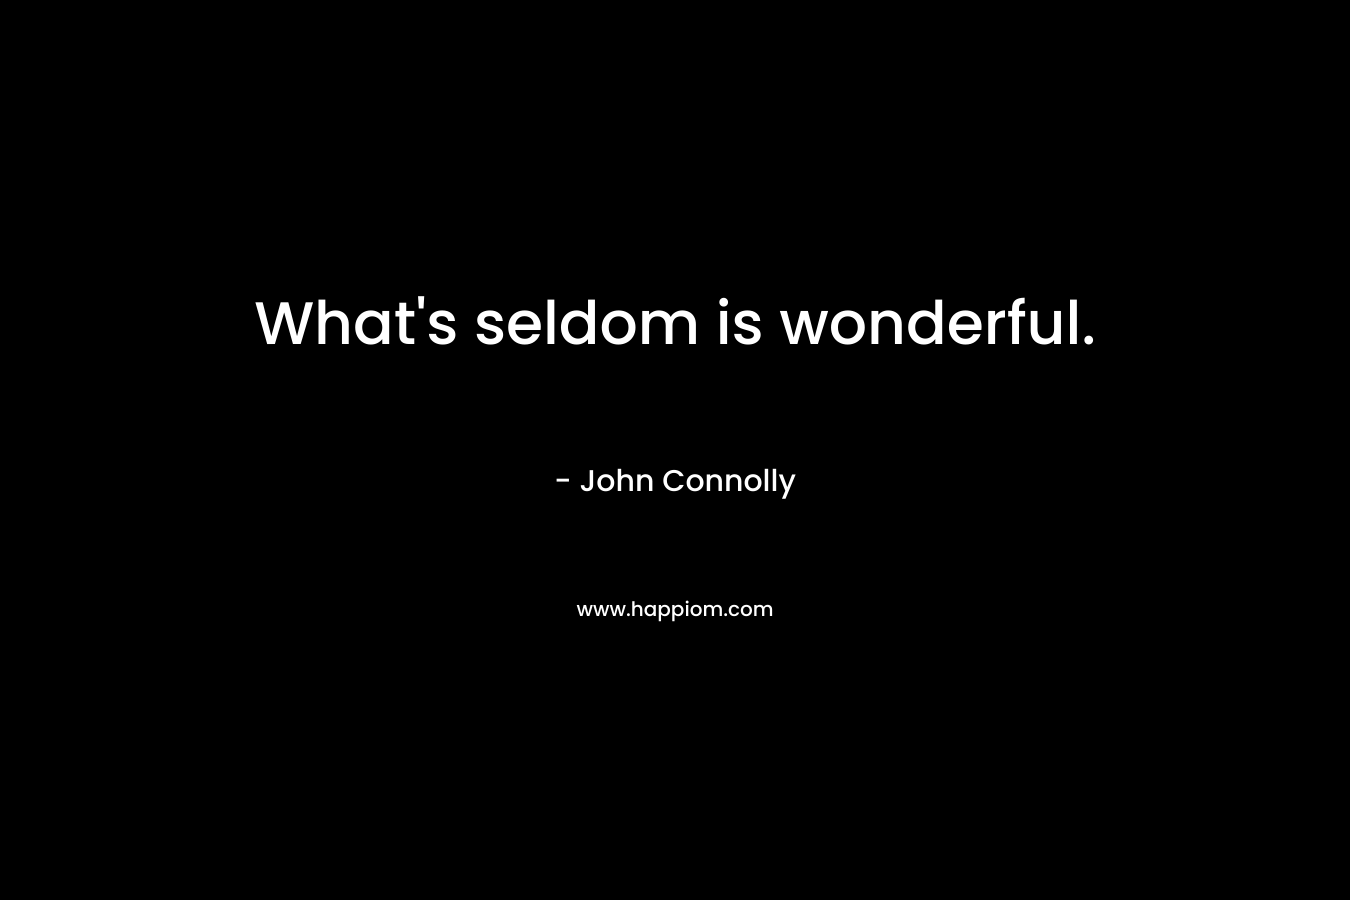 What’s seldom is wonderful. – John Connolly